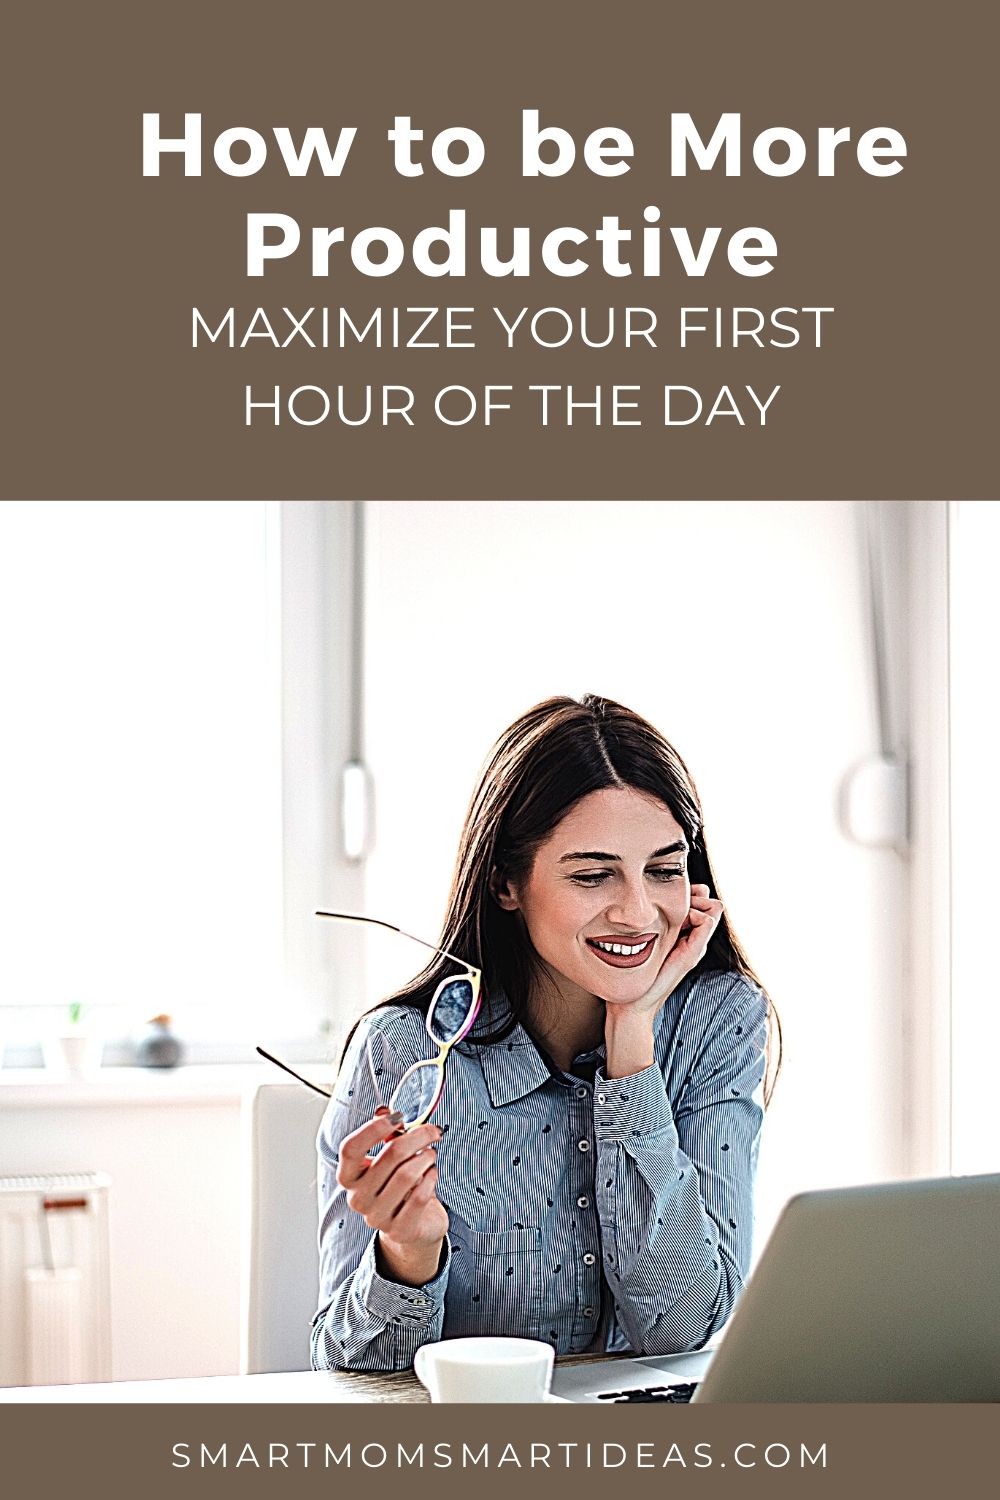 Be more productive by maximizing the first hour of your day. Try these 5 tips that will help you be more productive in your first hour and all day.